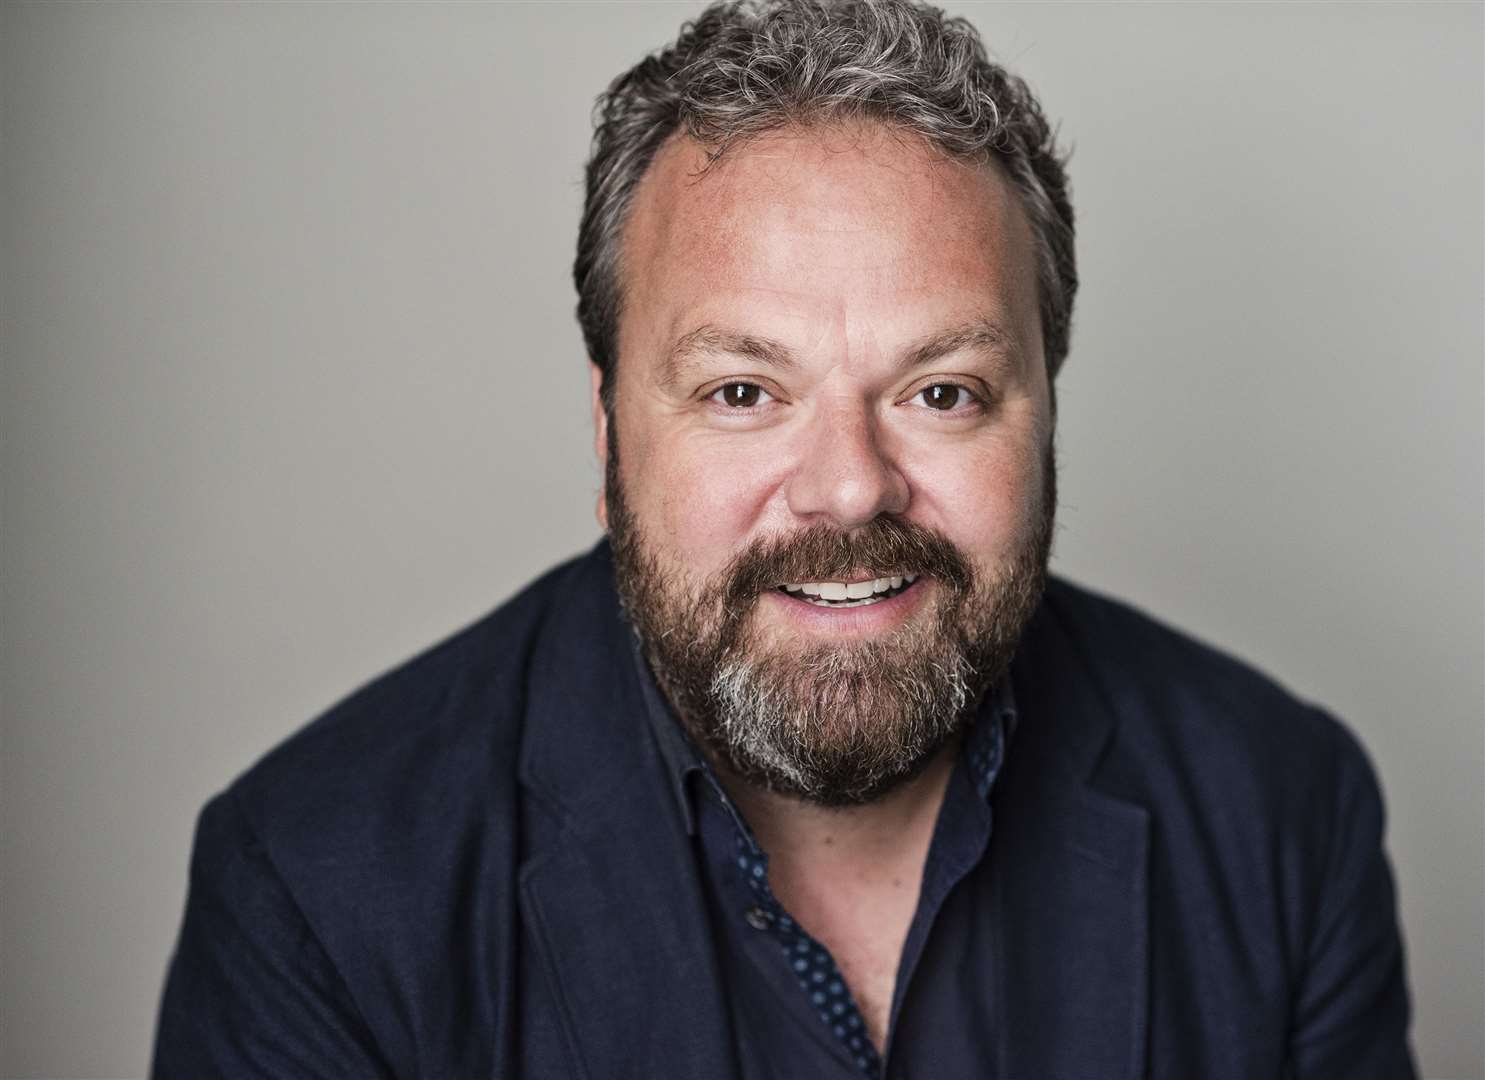 Hal Cruttenden is one of the comedians playing at the Comedy Store residency in Tunbridge Wells